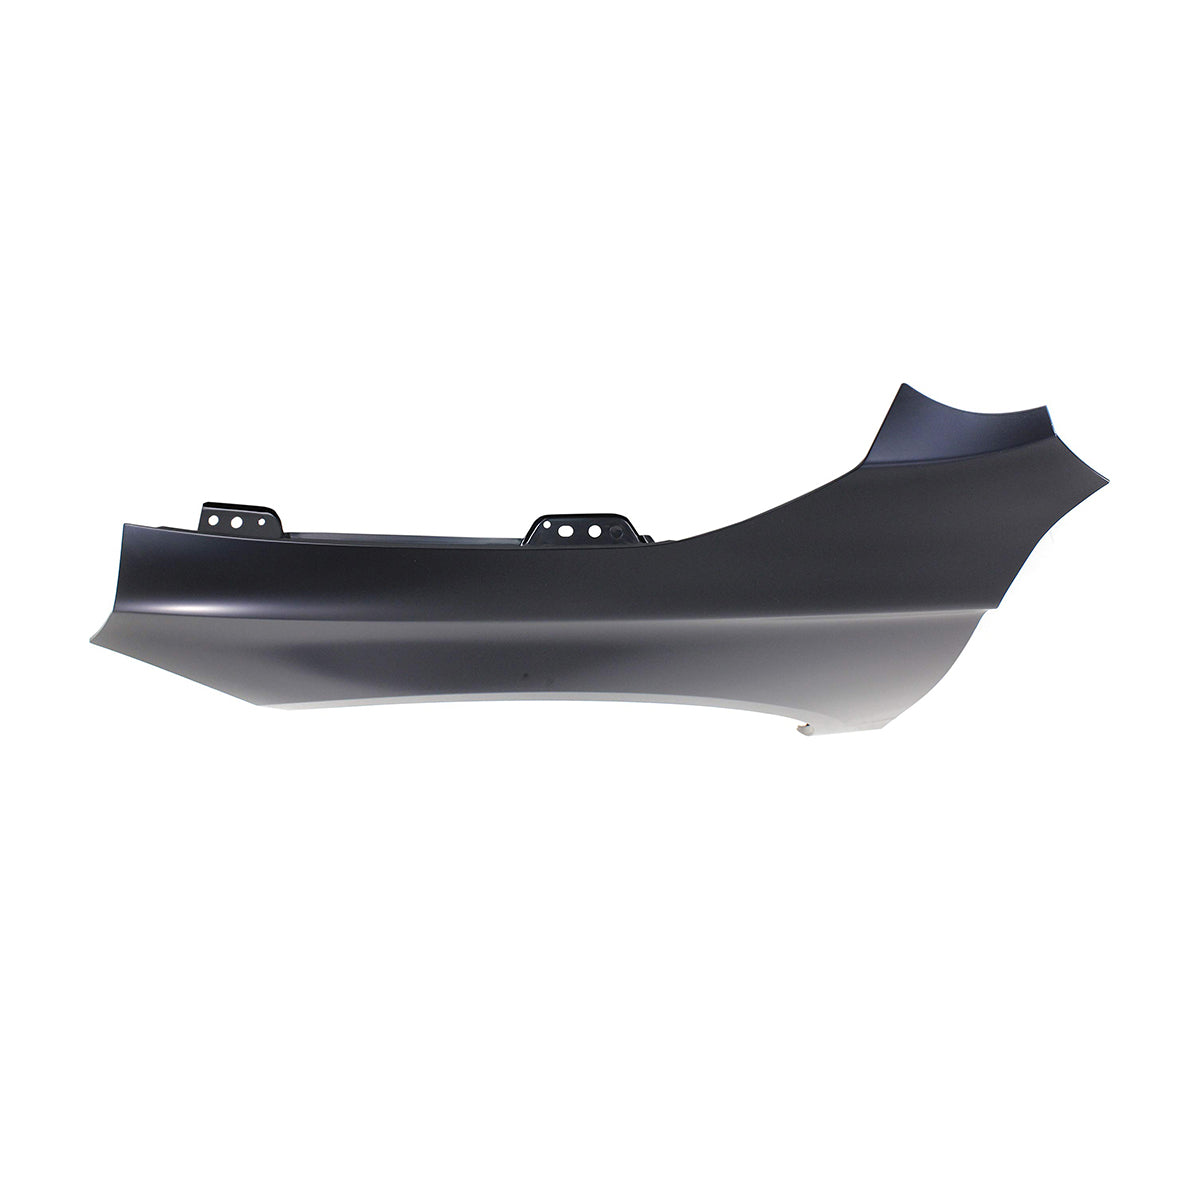 Replacement FRONT FENDER, LH, 2014-2020 Chevrolet Impala, 23151660, (Steel)